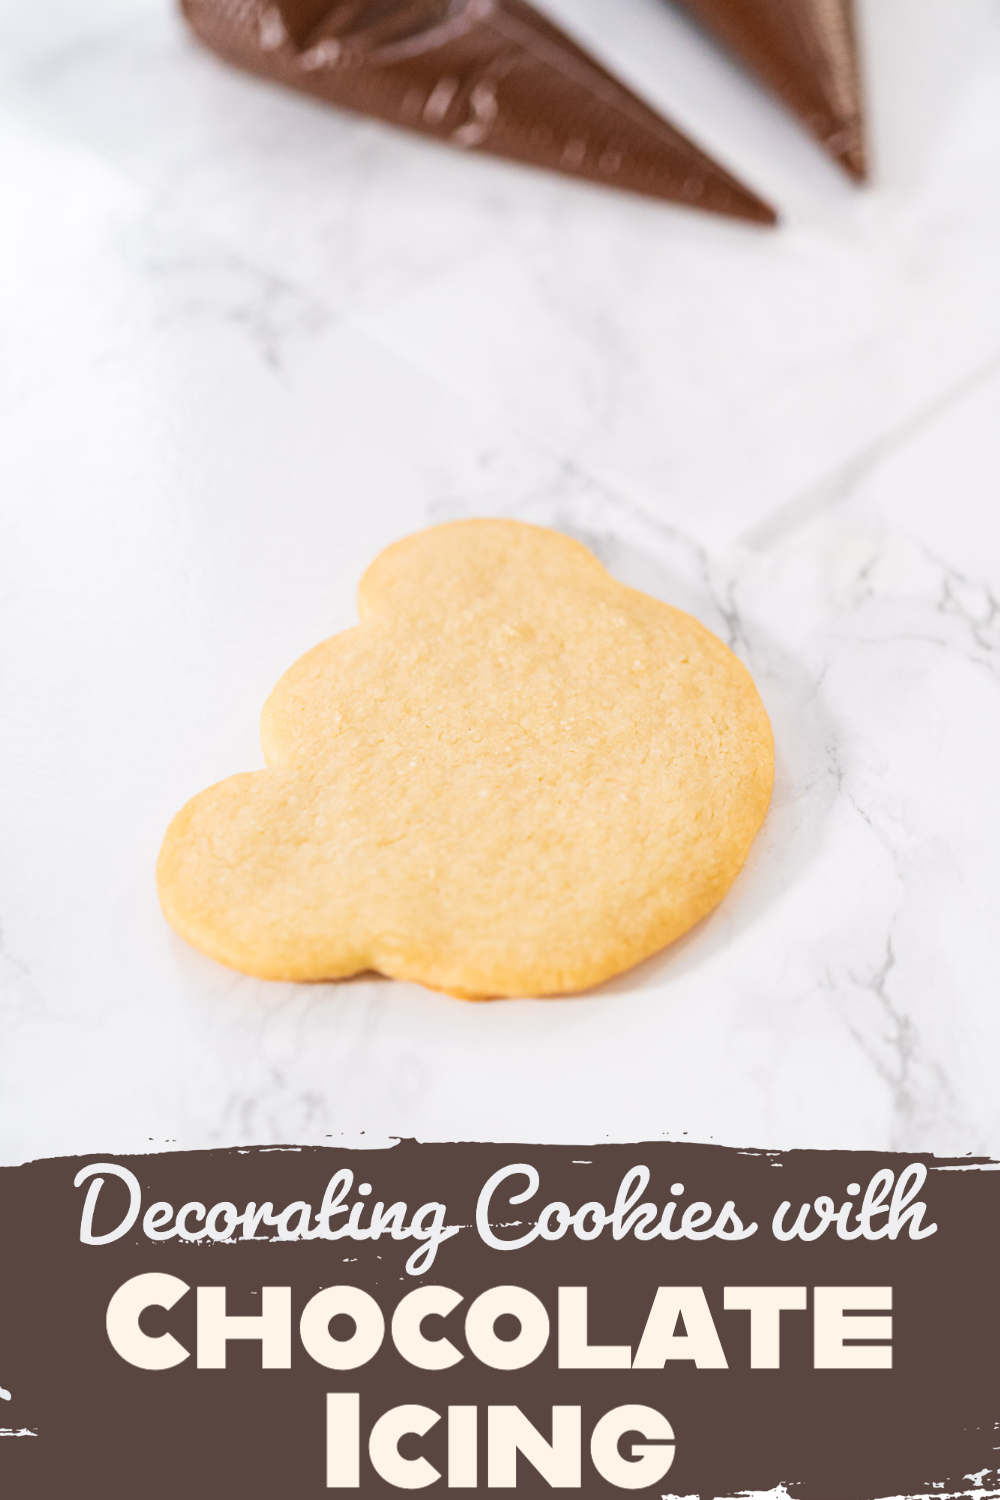 Decorating Cookies with Chocolate Icing